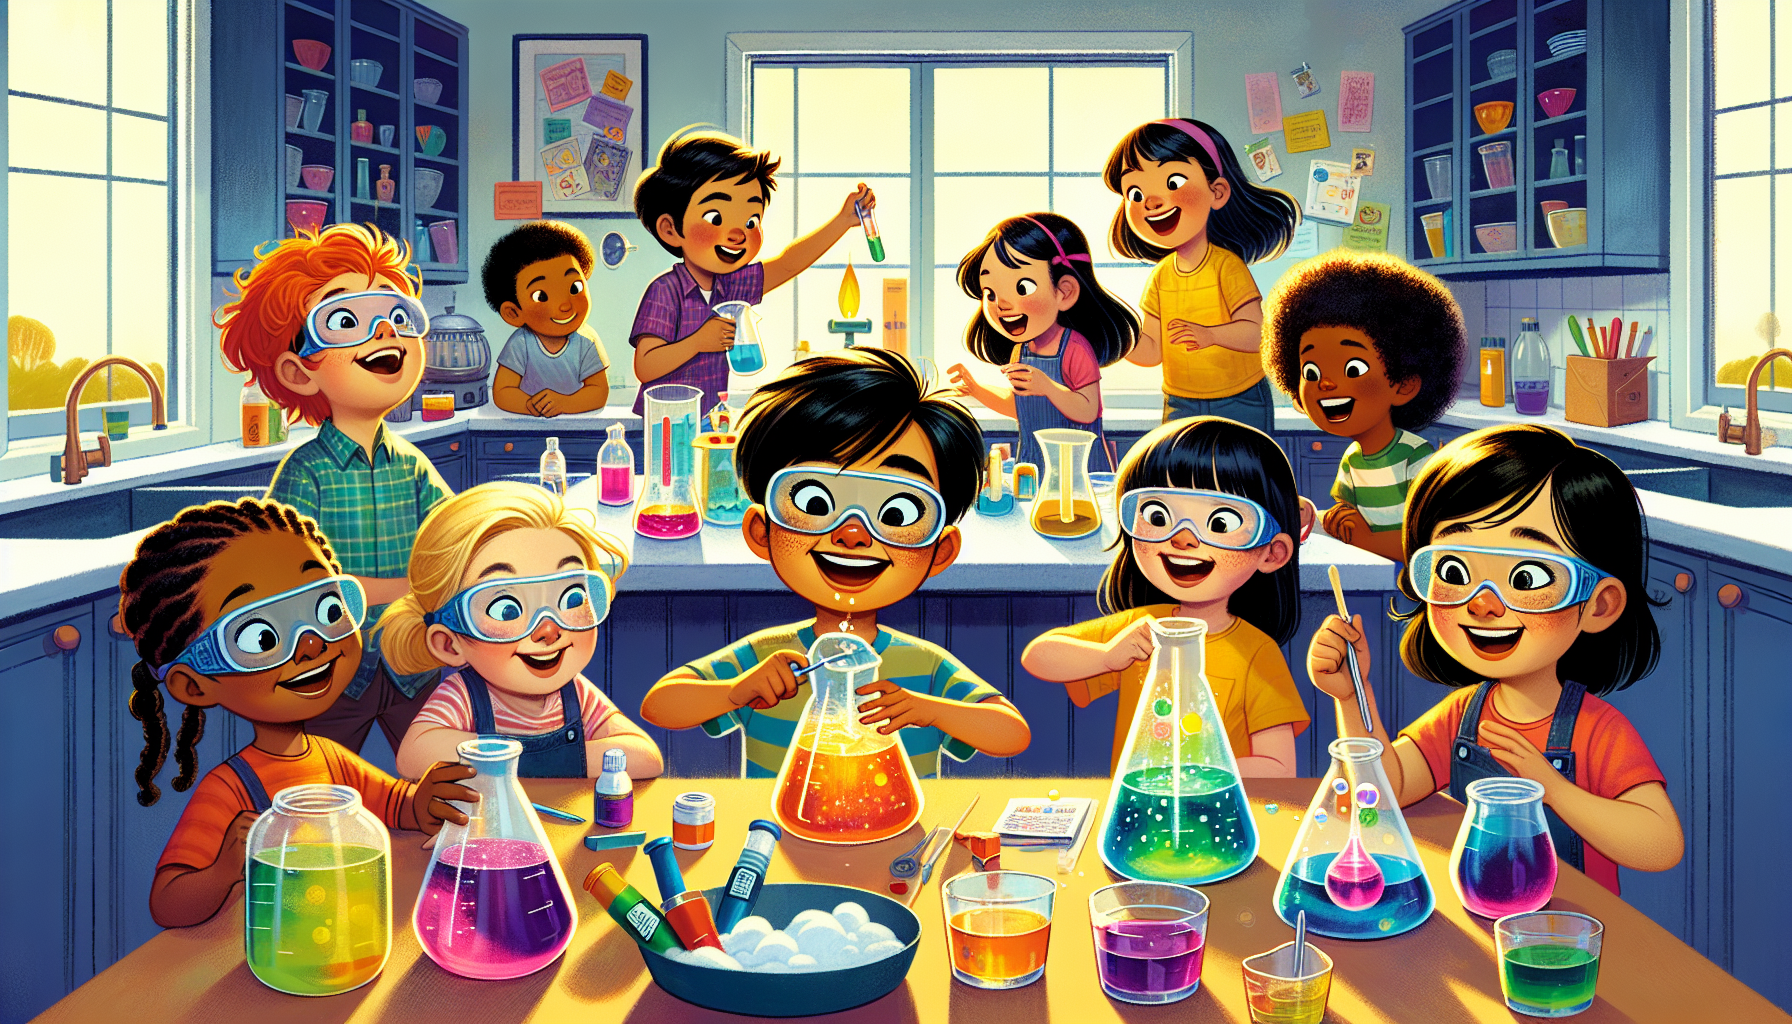 Children happily conducting colorful science experiments at a kitchen table, surrounded by household items like vinegar, baking soda, and food coloring, with excited expressions and safety goggles, in a bright, well-lit kitchen setting.